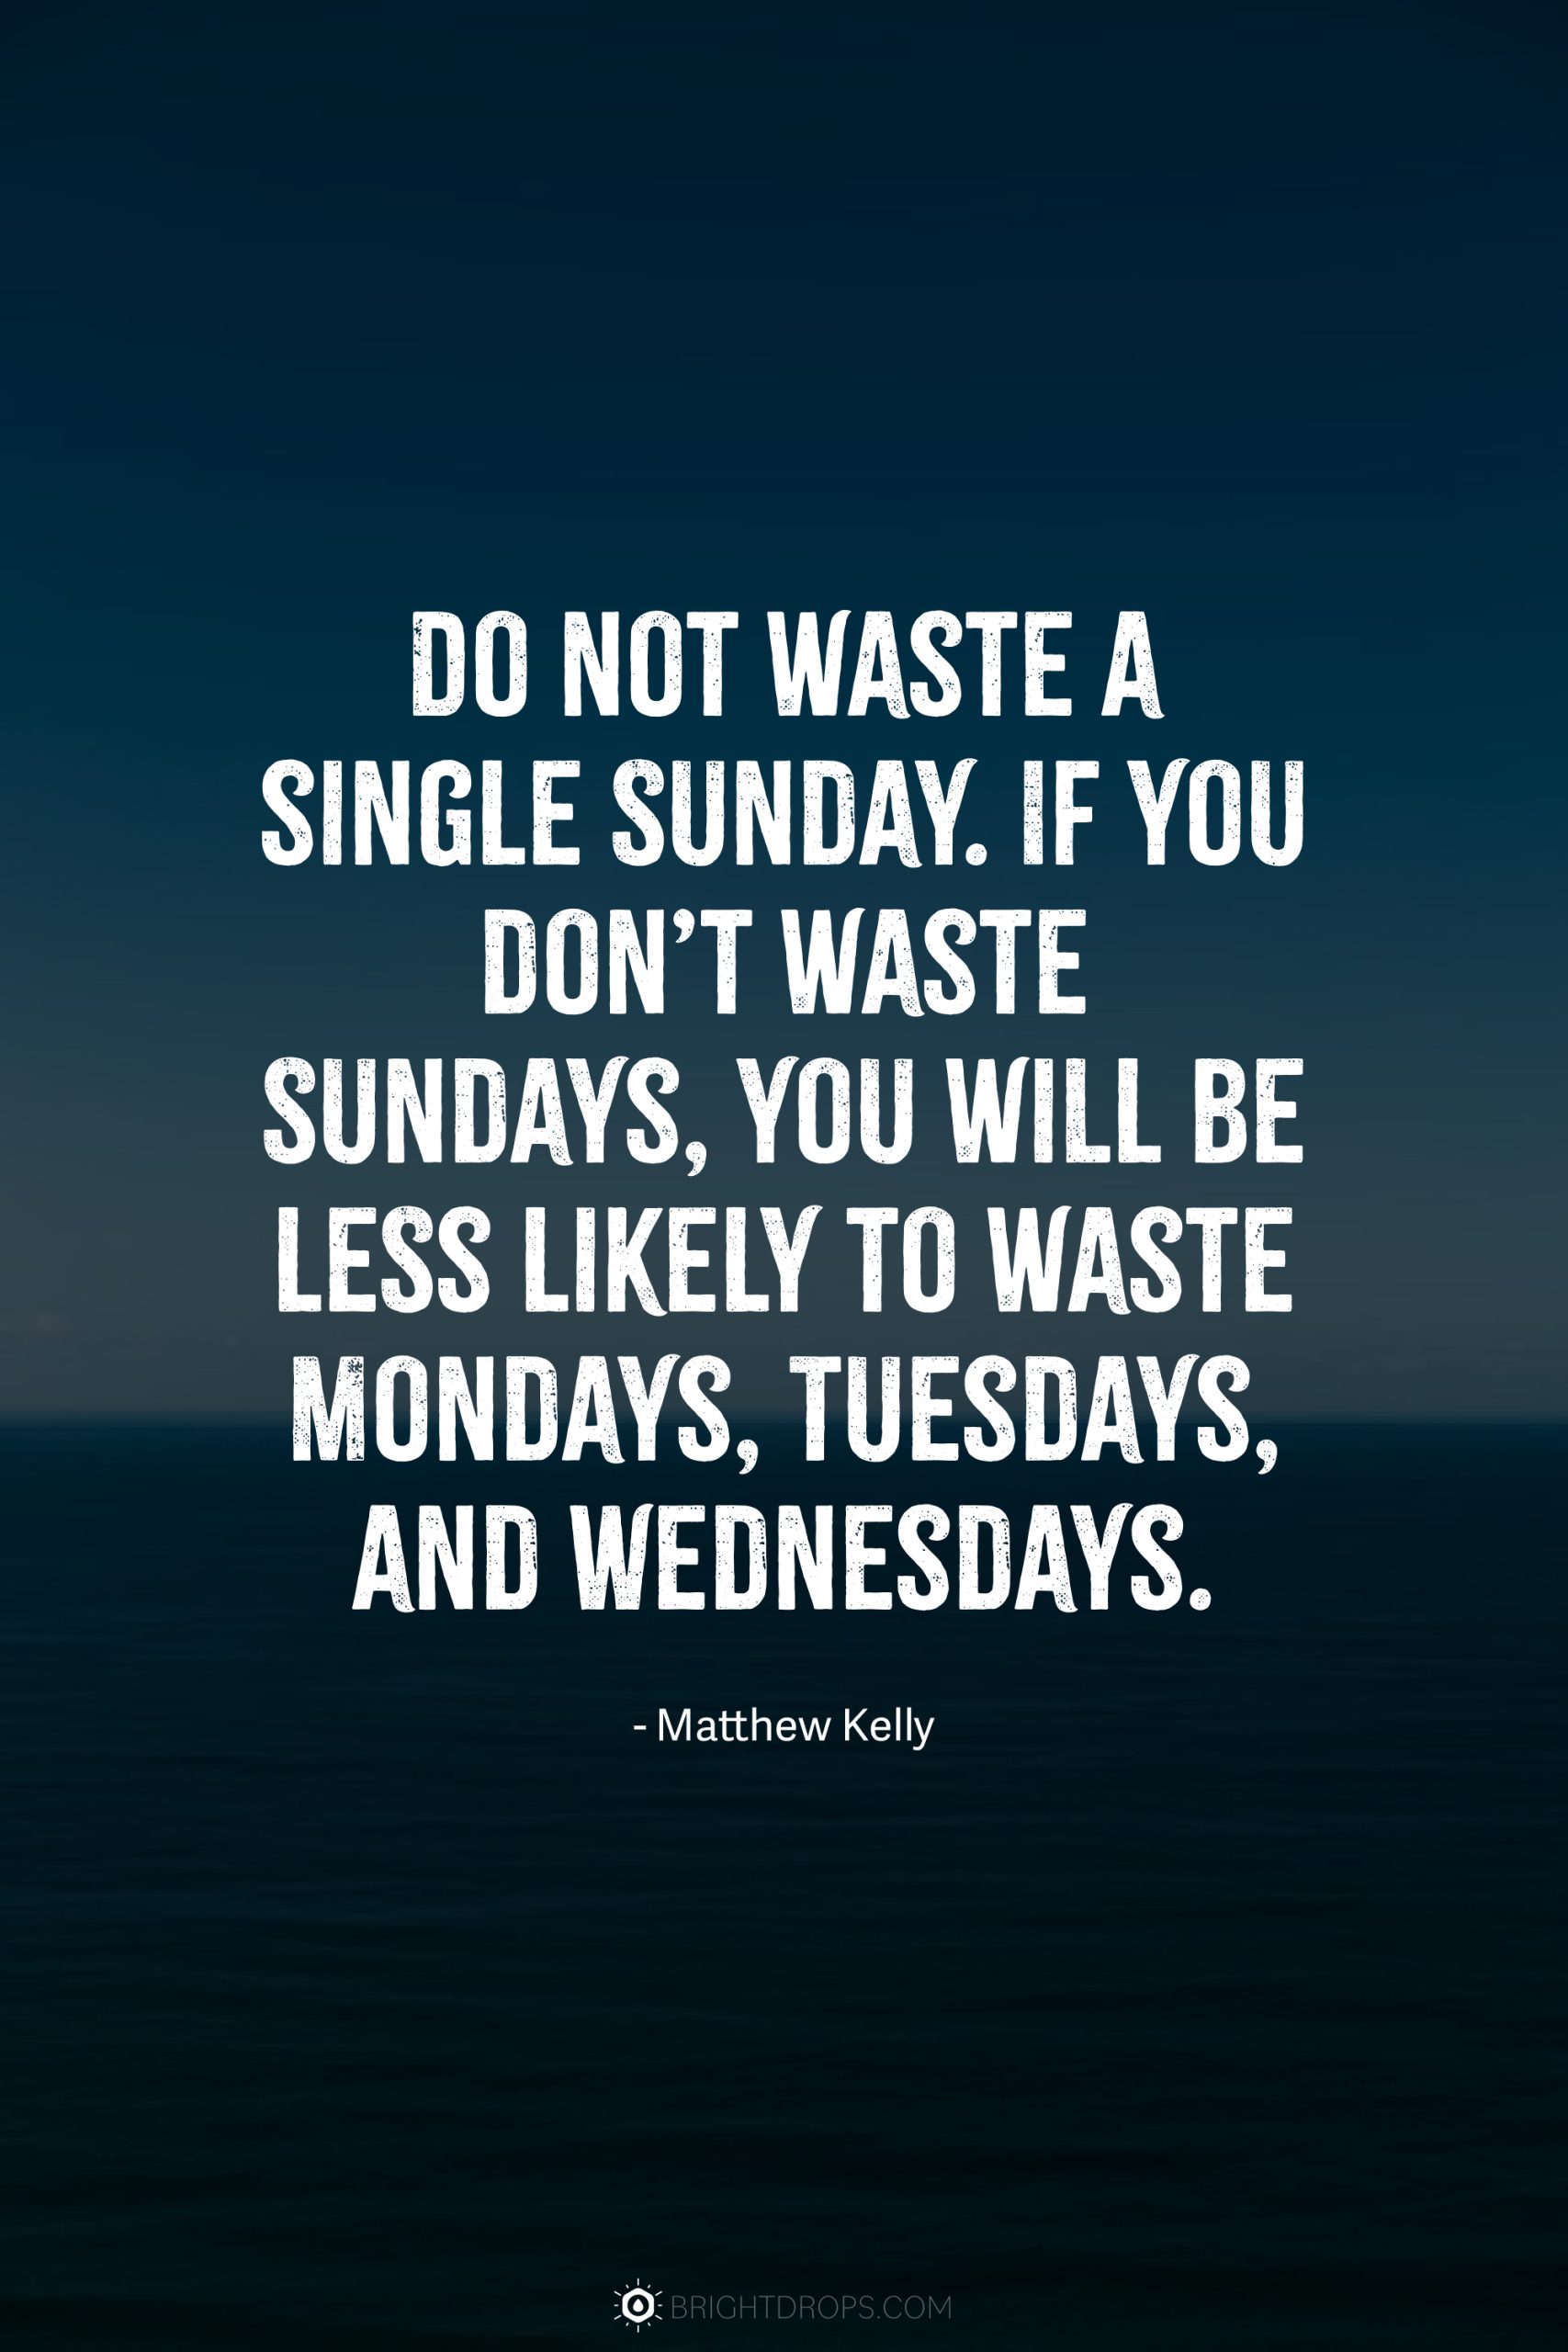 Do not waste a single Sunday. If you don’t waste Sundays, you will be less likely to waste Mondays, Tuesdays, and Wednesdays.